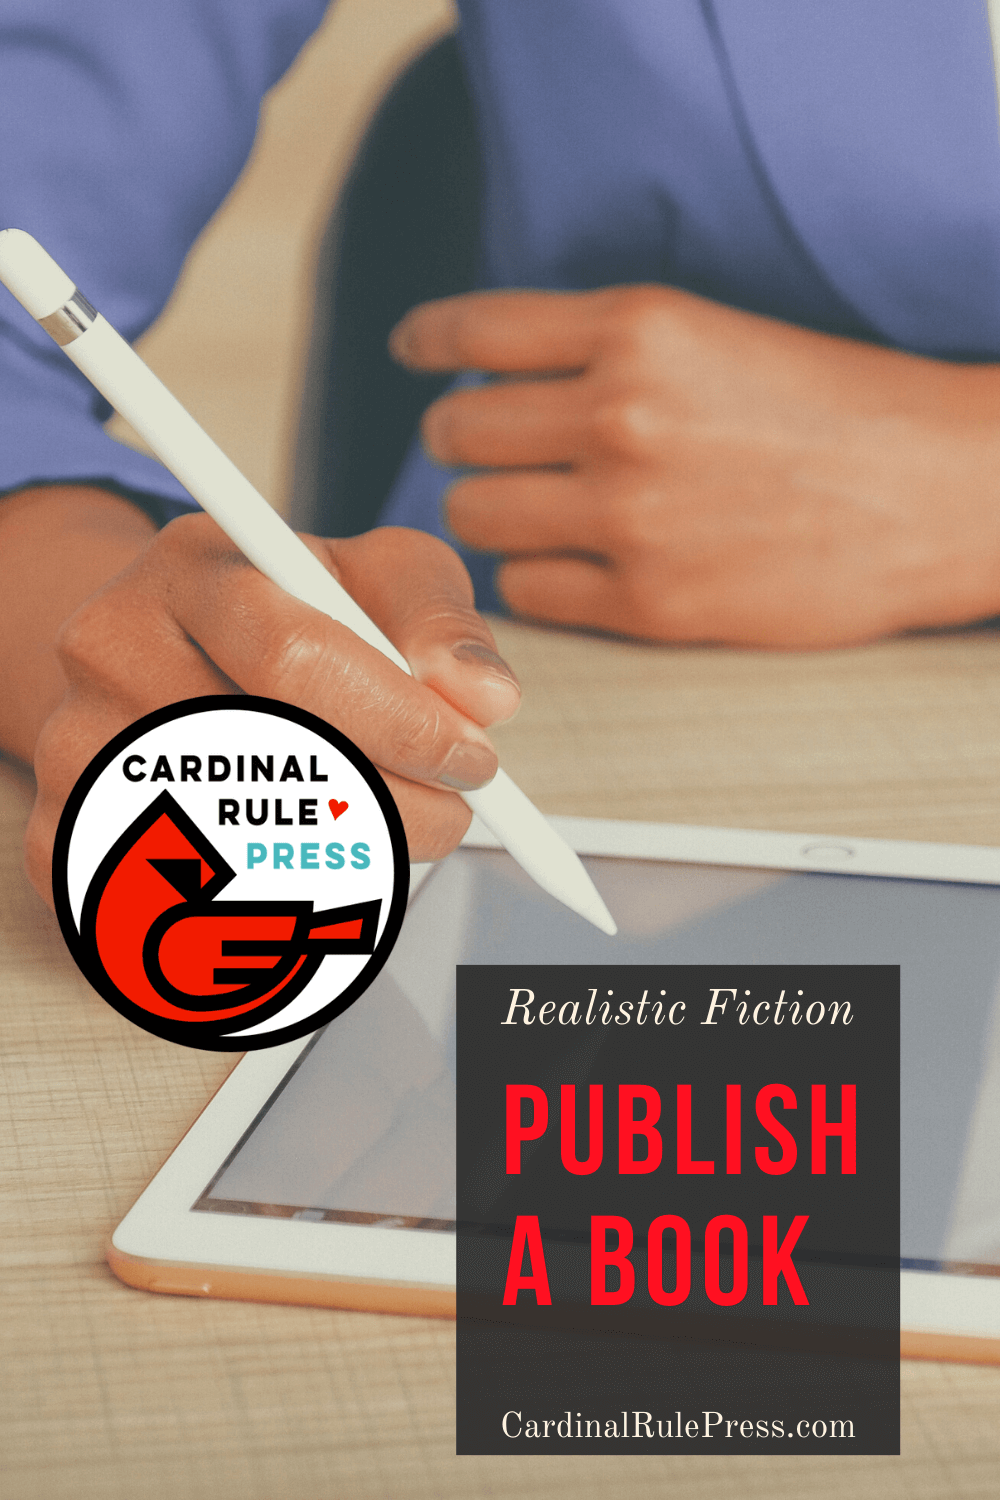 Looking for Authors: Realistic Fiction Picture Books-Become familiar with our titles and follow the list of guidelines below before submitting your work.
#LookingForAuthors #PublishABook #RealisticFiction #PictureBooks #ChildrensBook